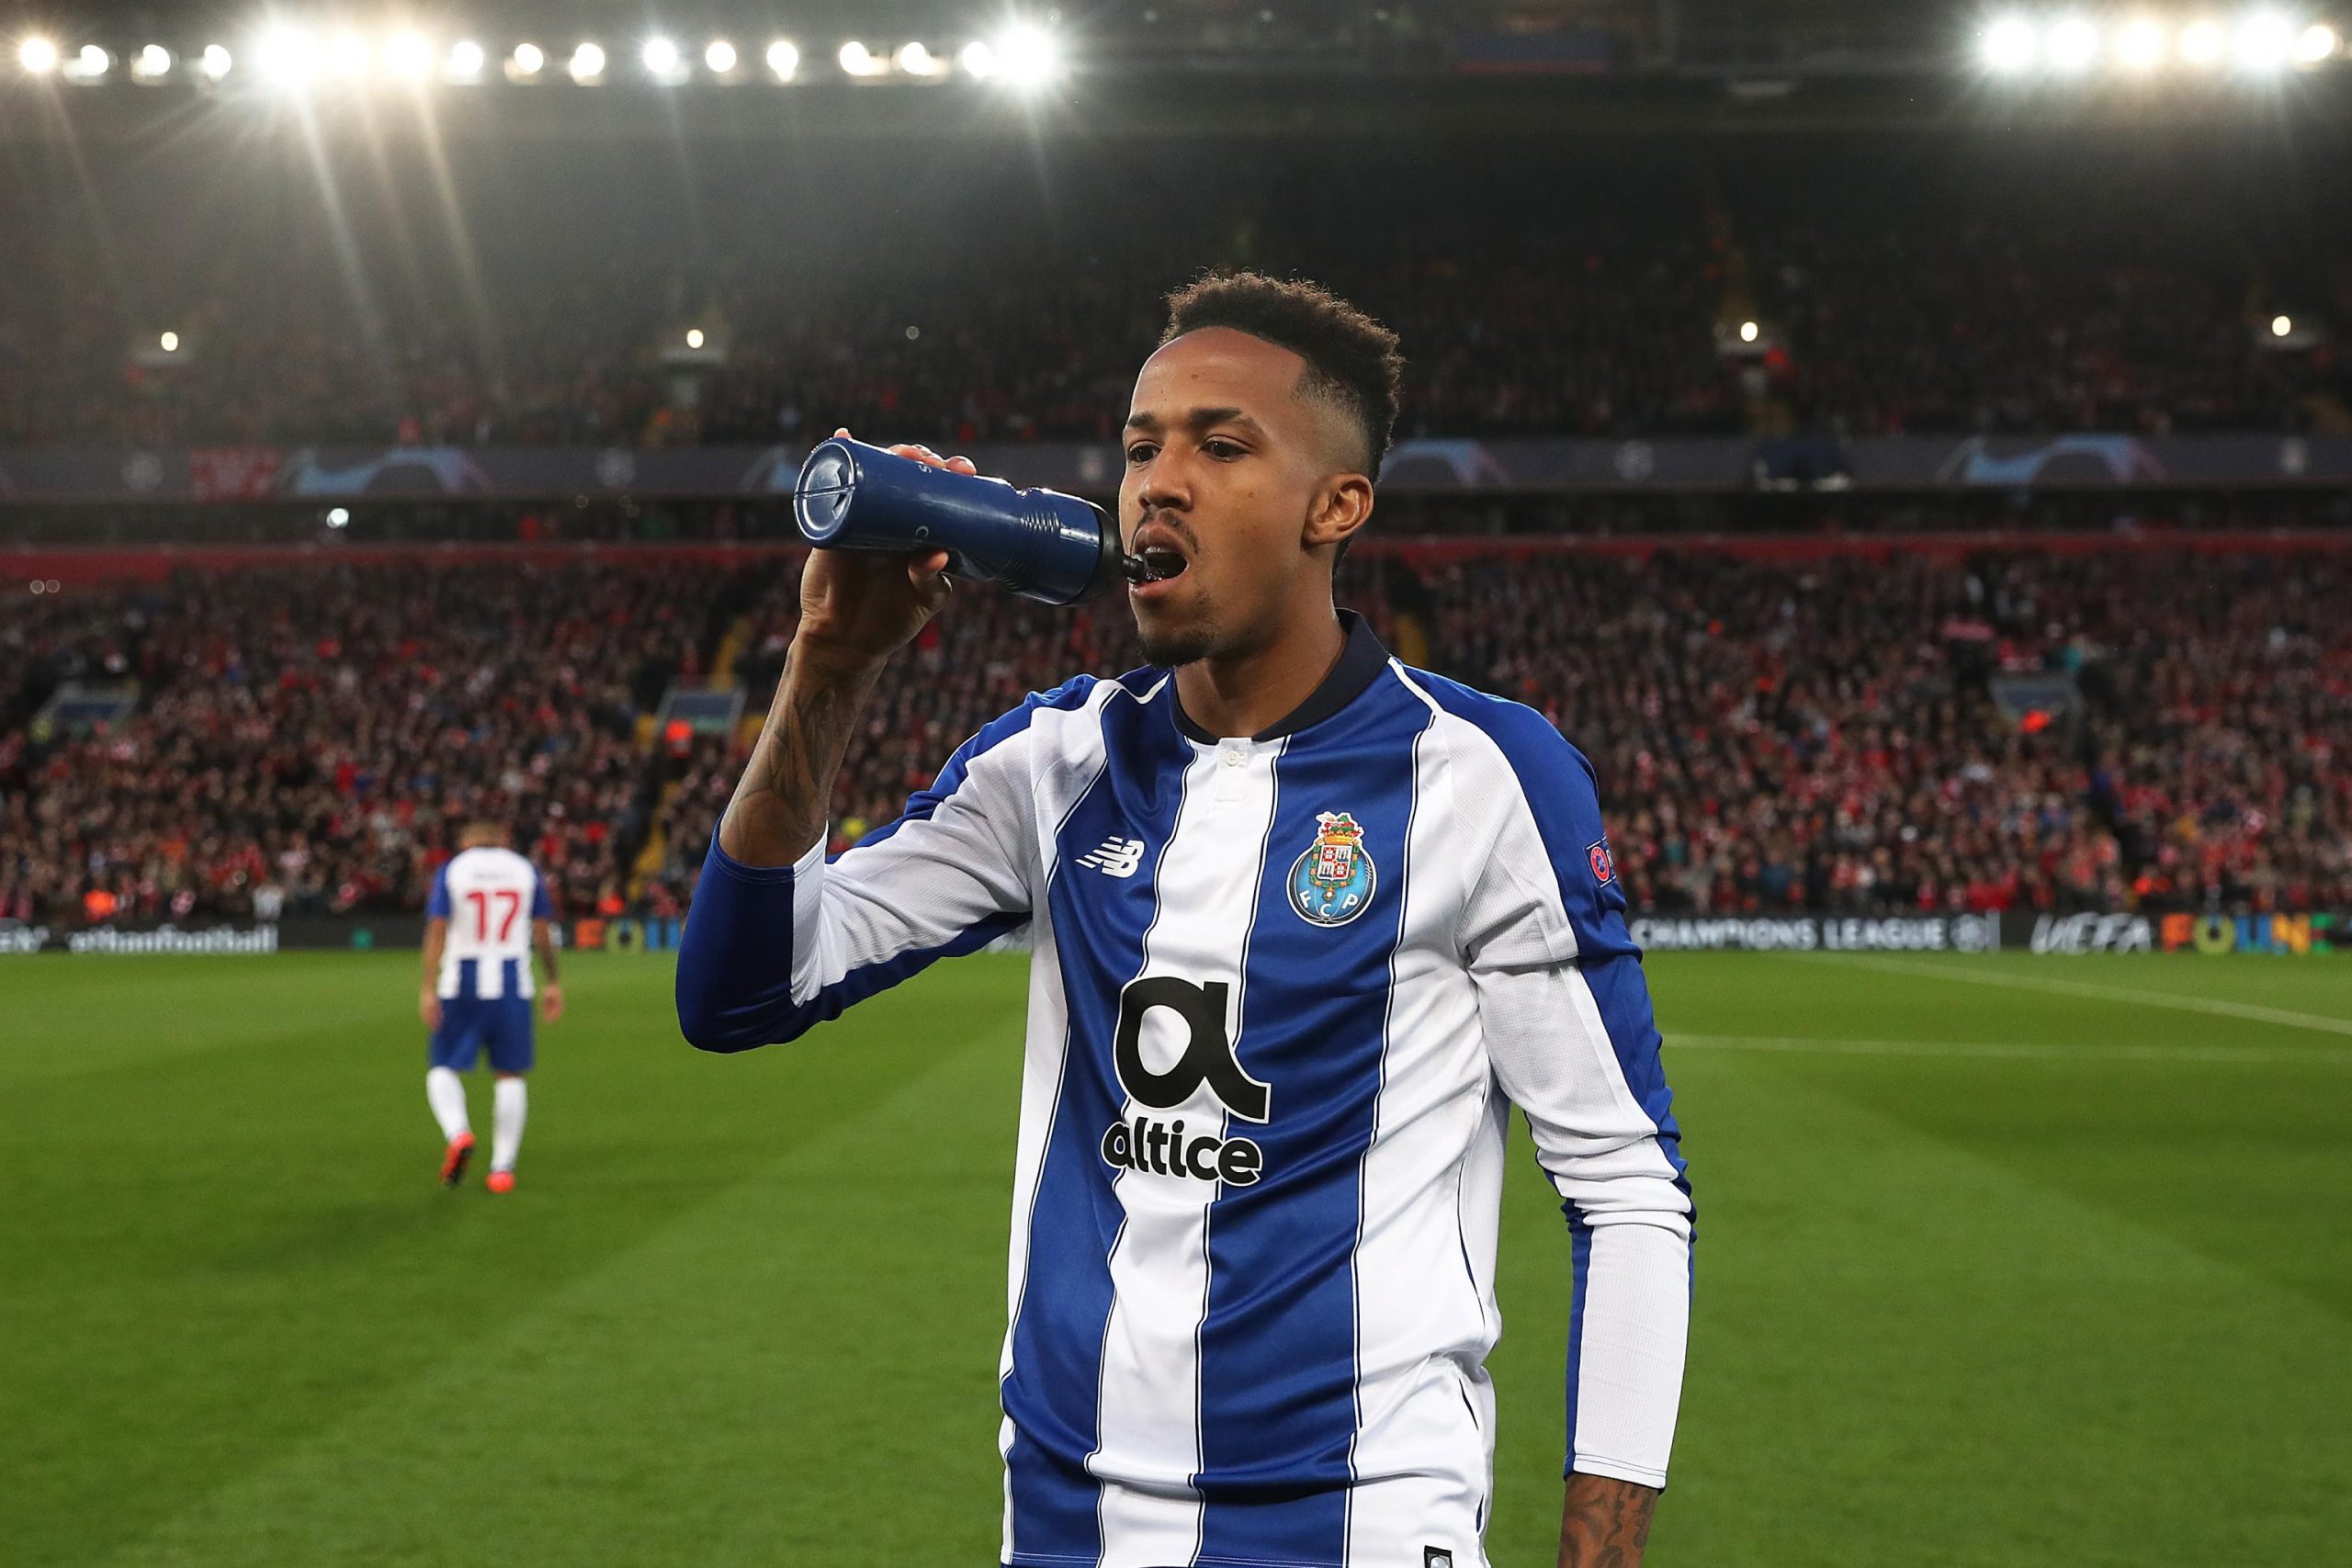 Madrid Brazilian Militao Could Be Signed by Arsenal